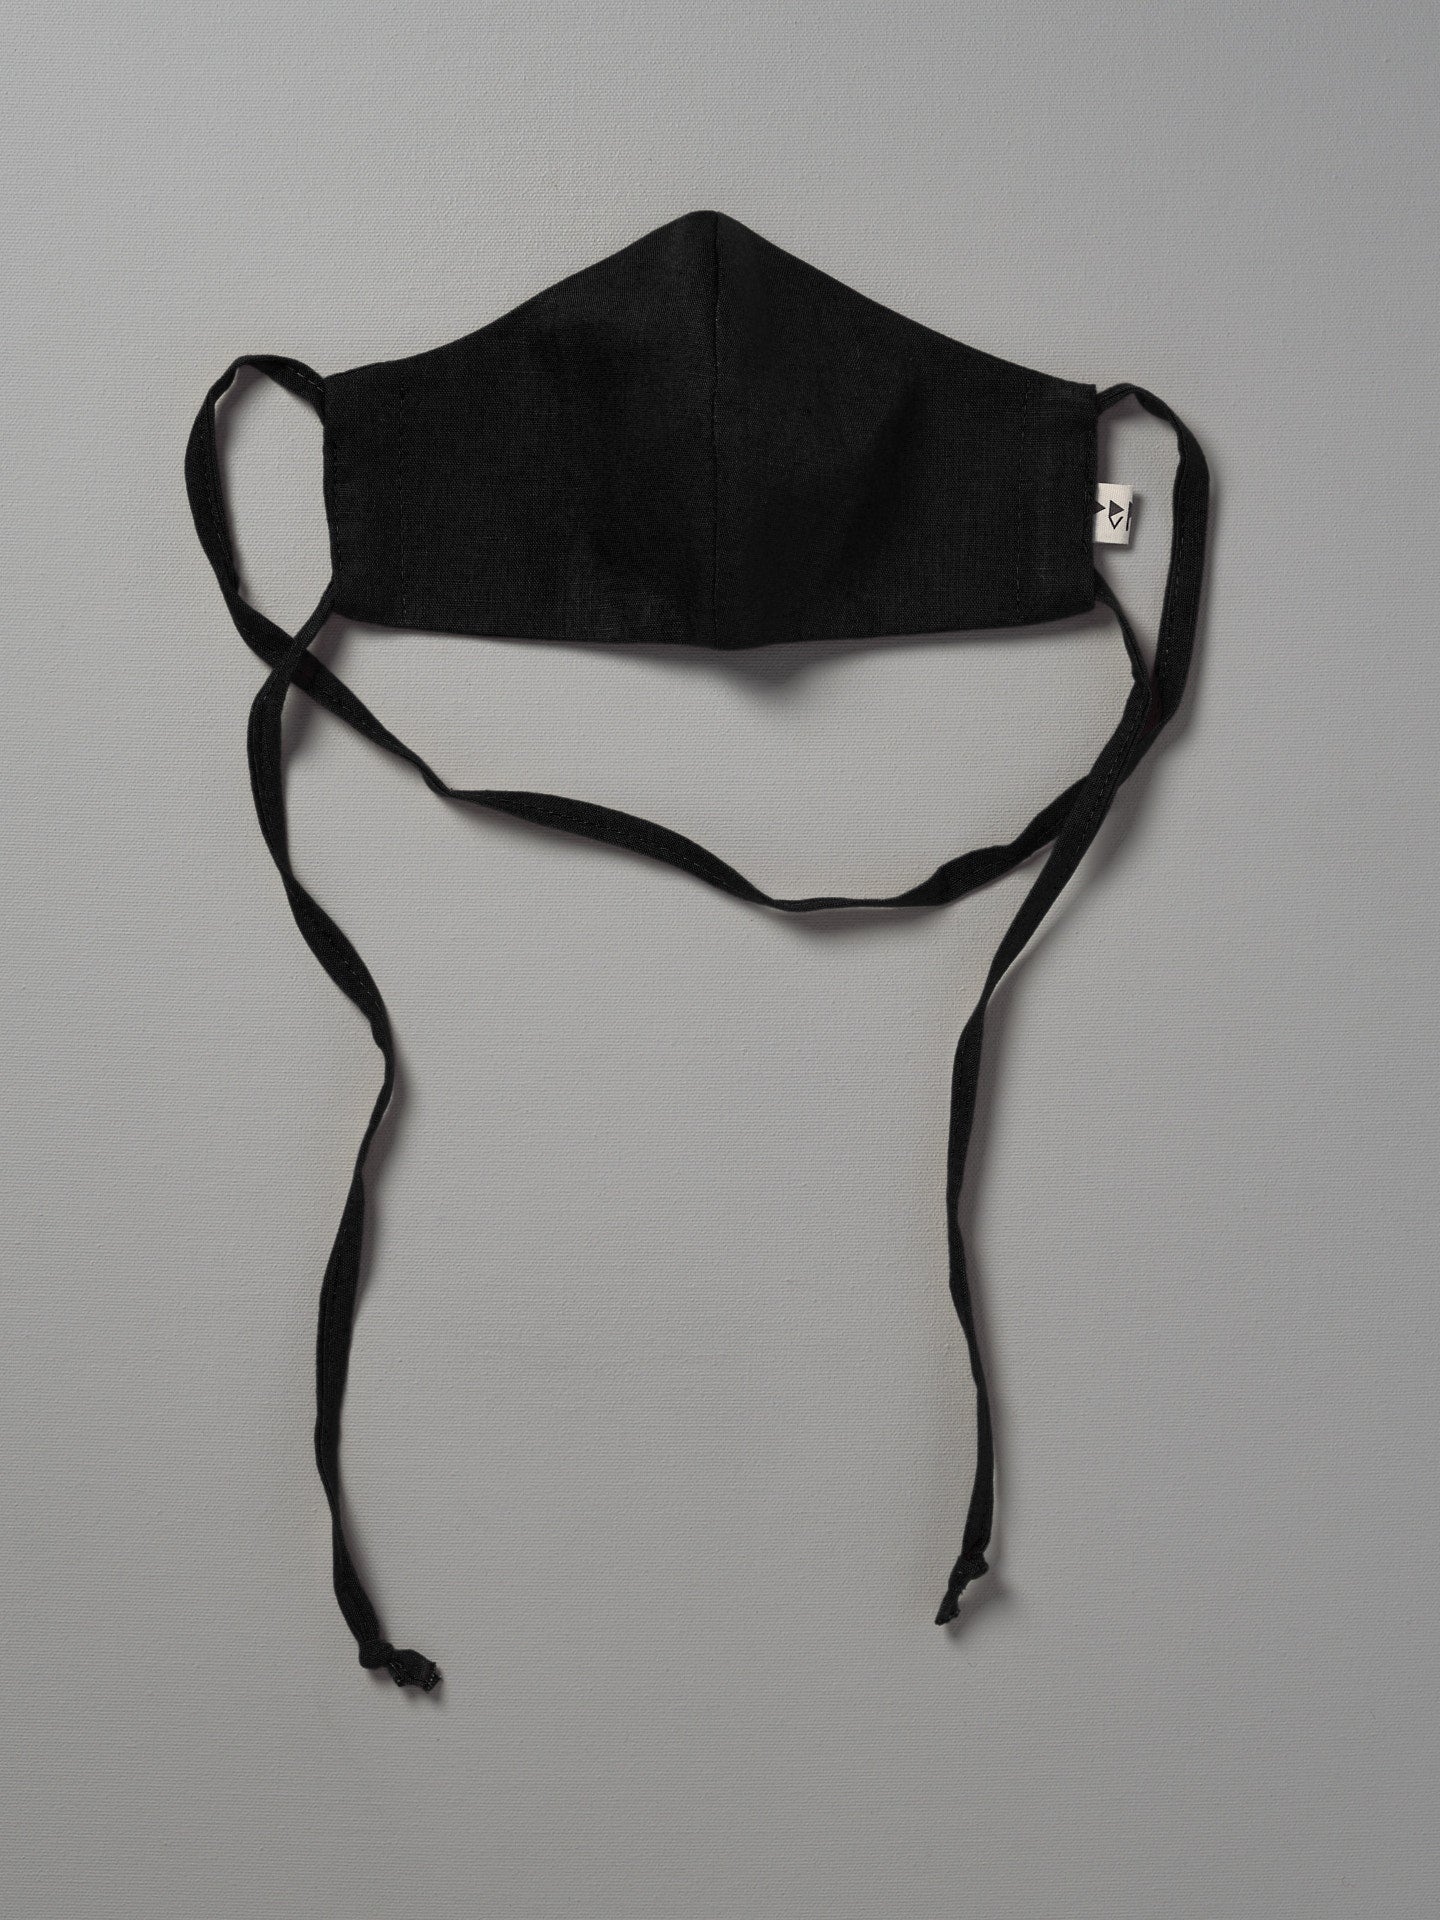 A Linen Face Mask - Noir by Peppin hanging on a gray background.